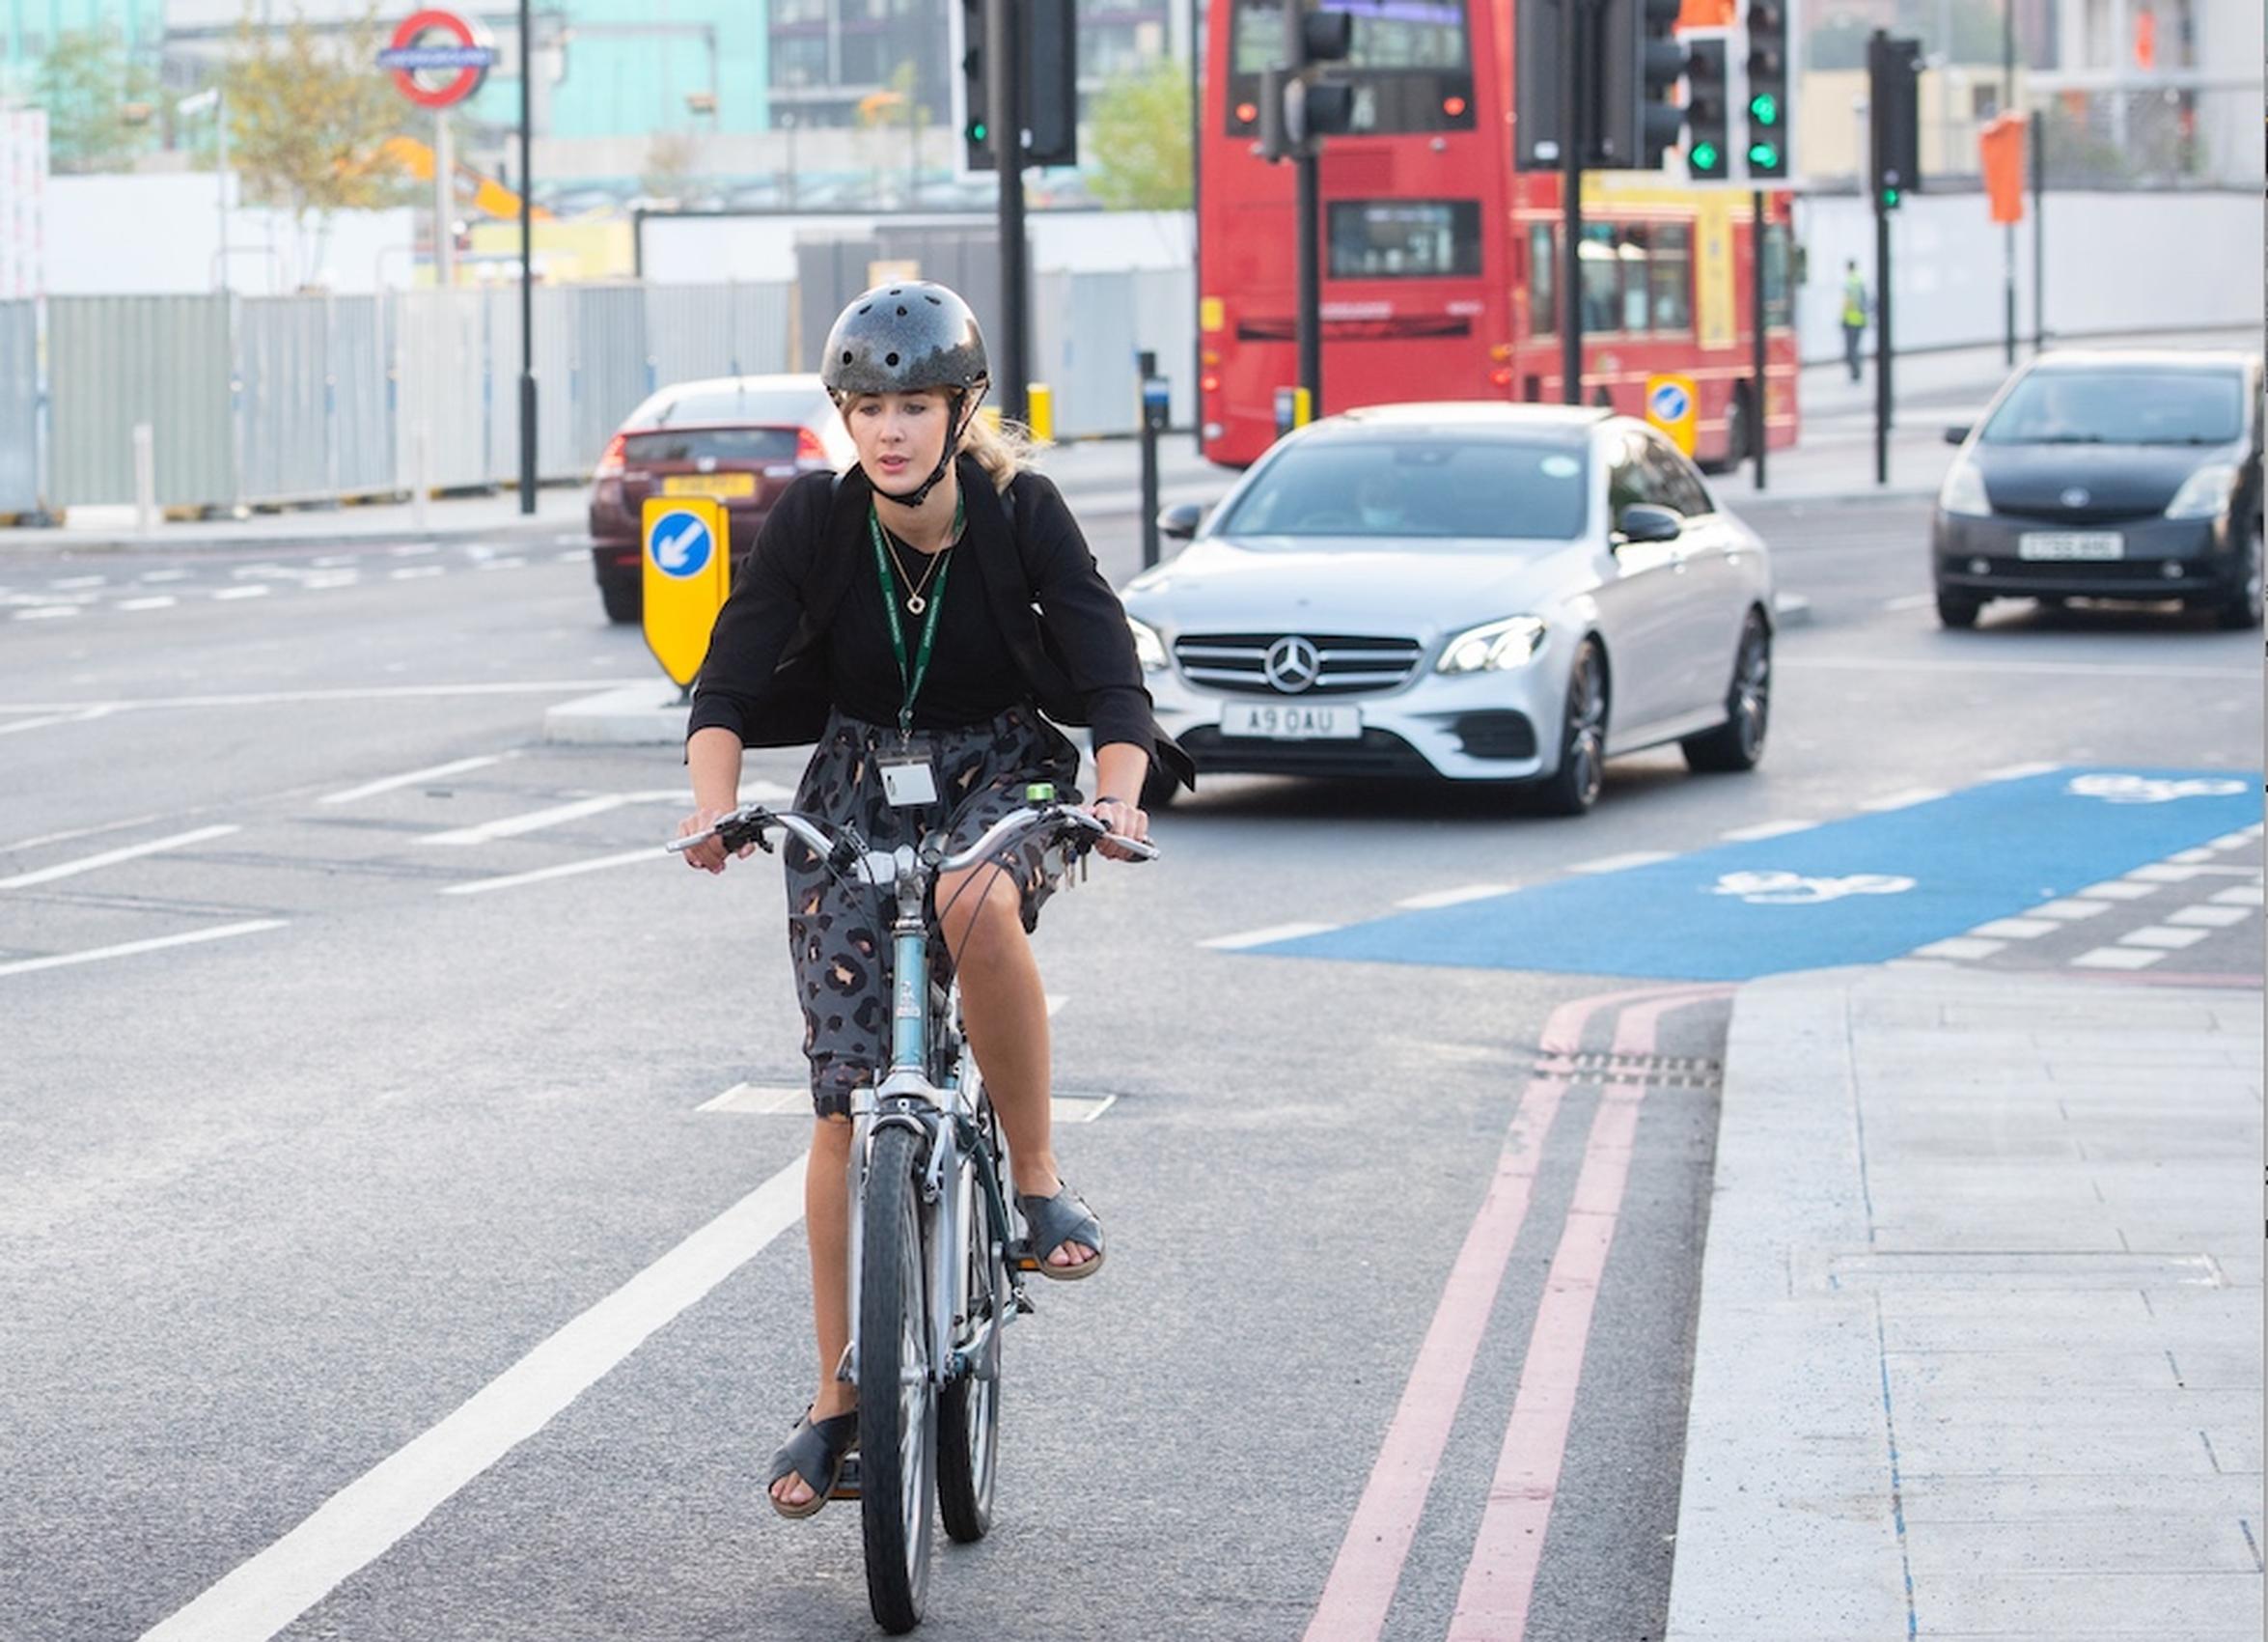 Drivers who infringe on cycle lanes on TfL roads and in some London boroughs will be issued with an £160 fine